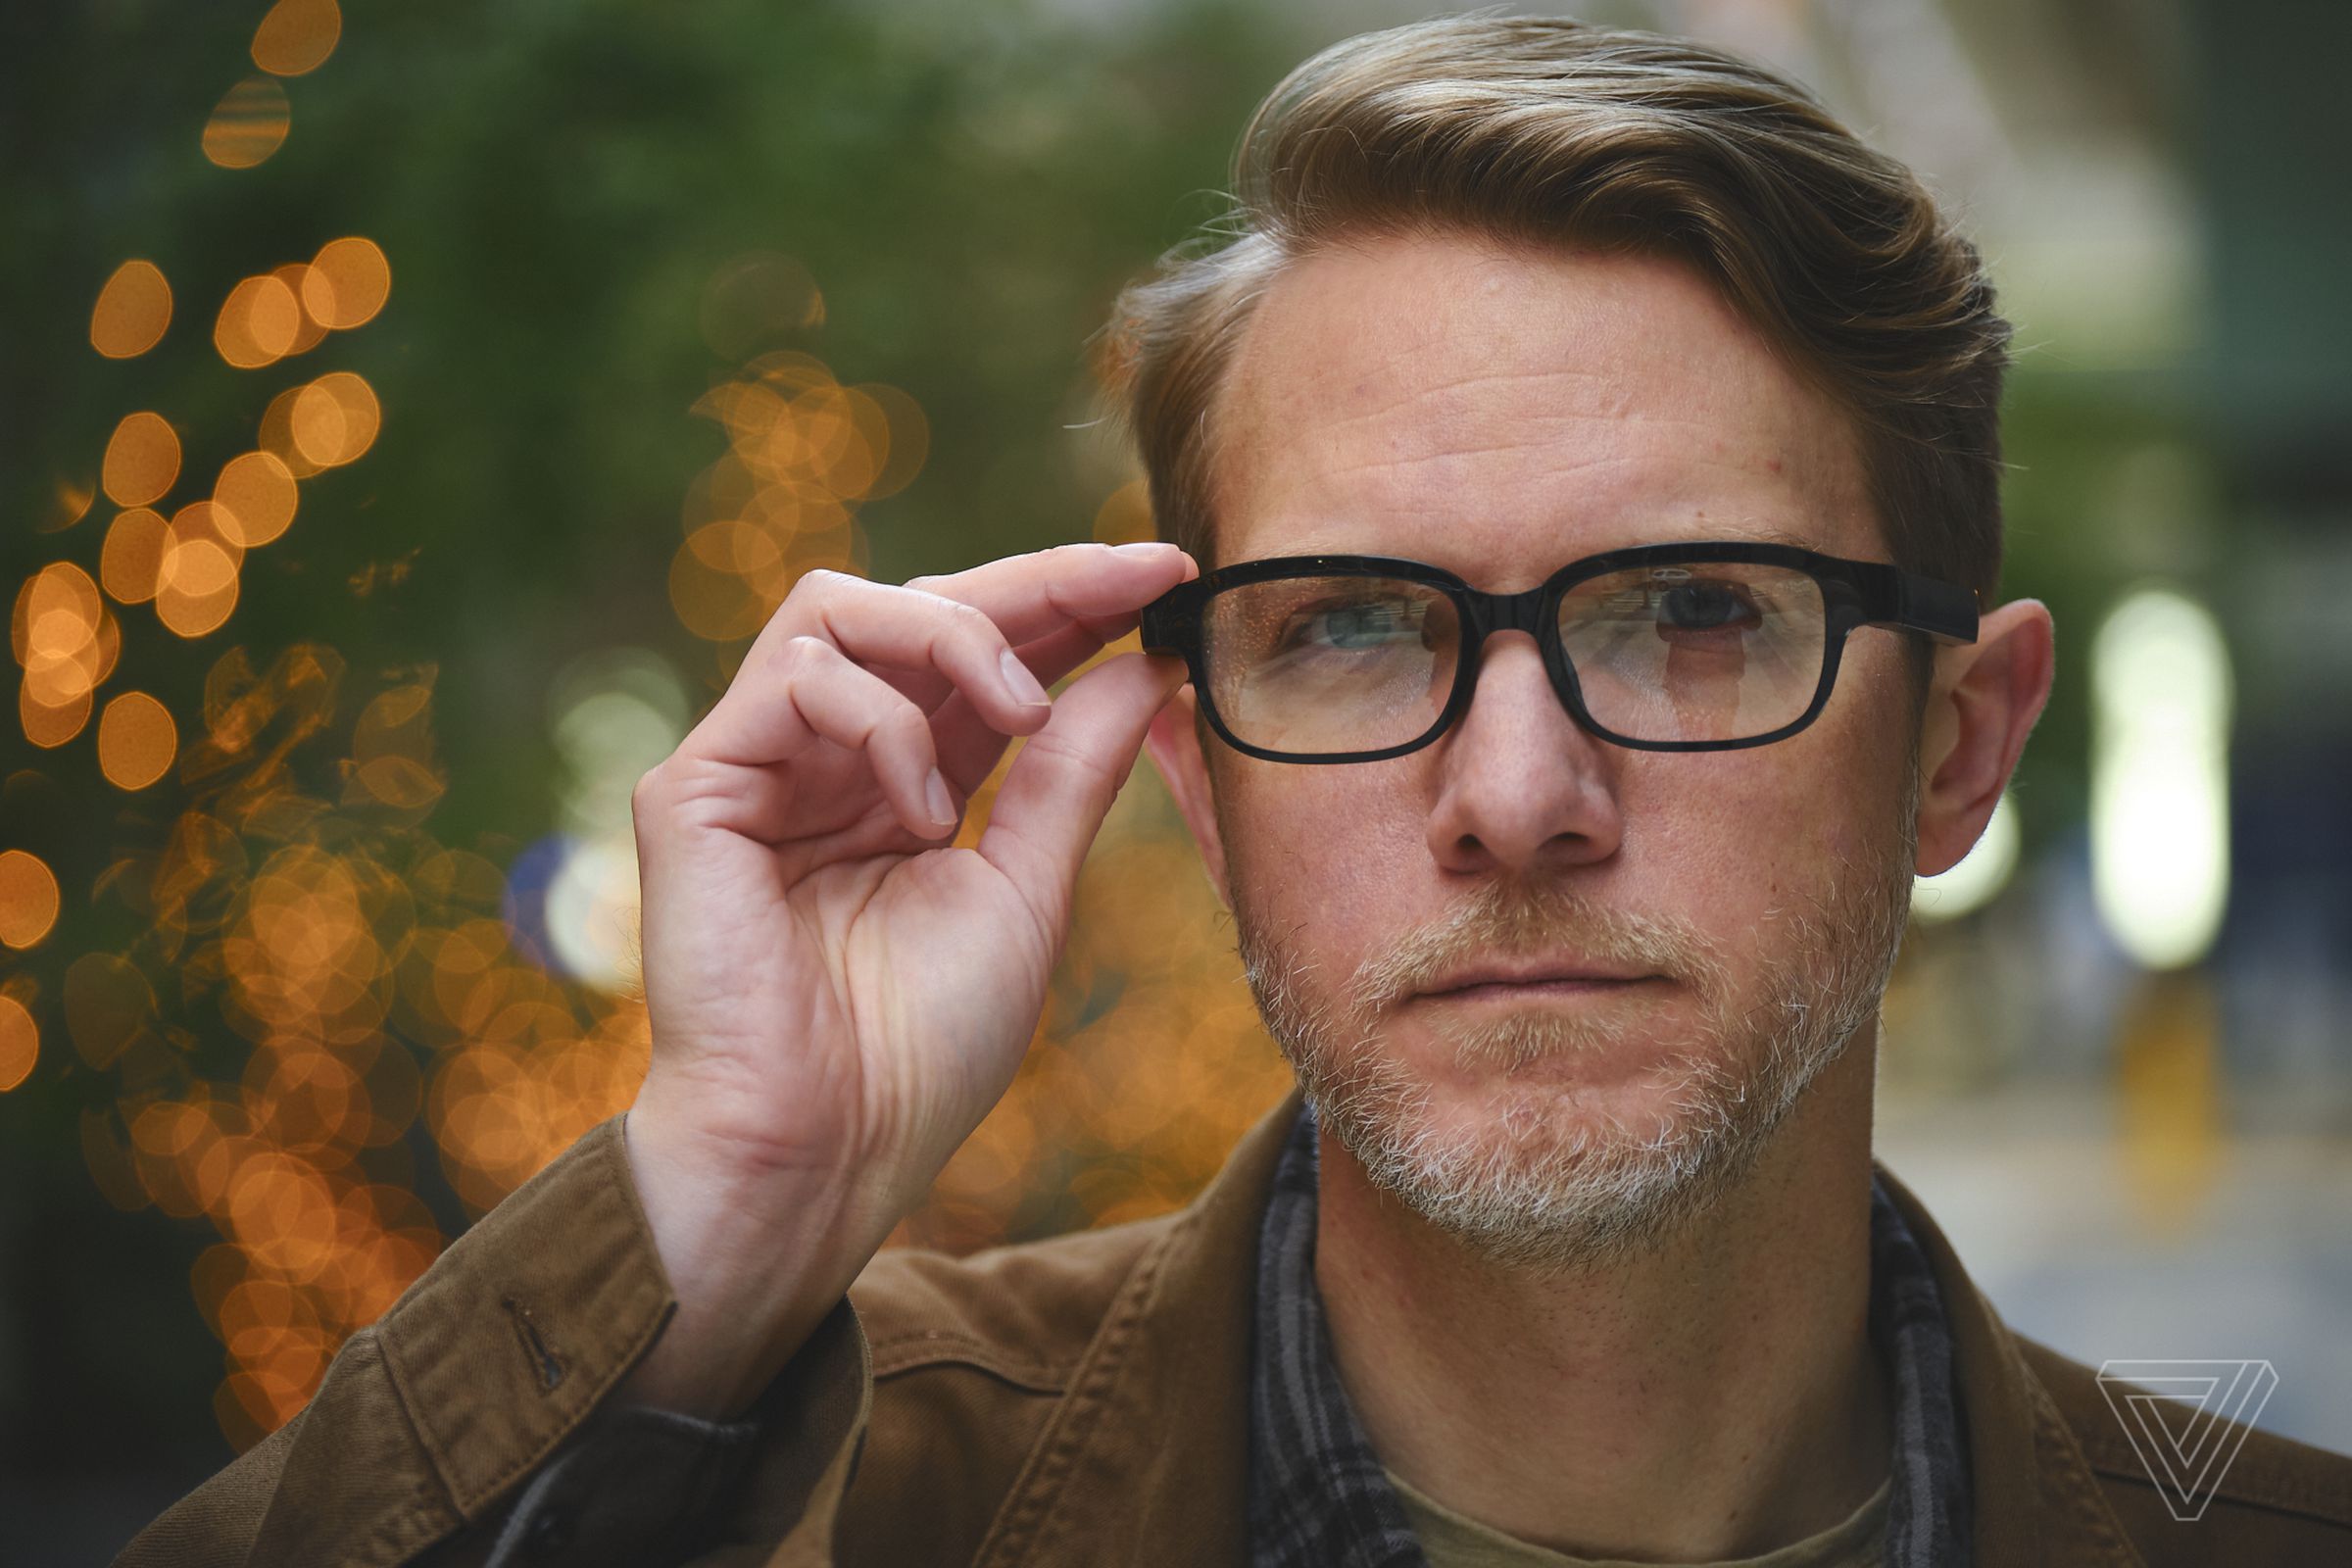 The Echo Frames look like relatively normal — but cheap — eyeglasses